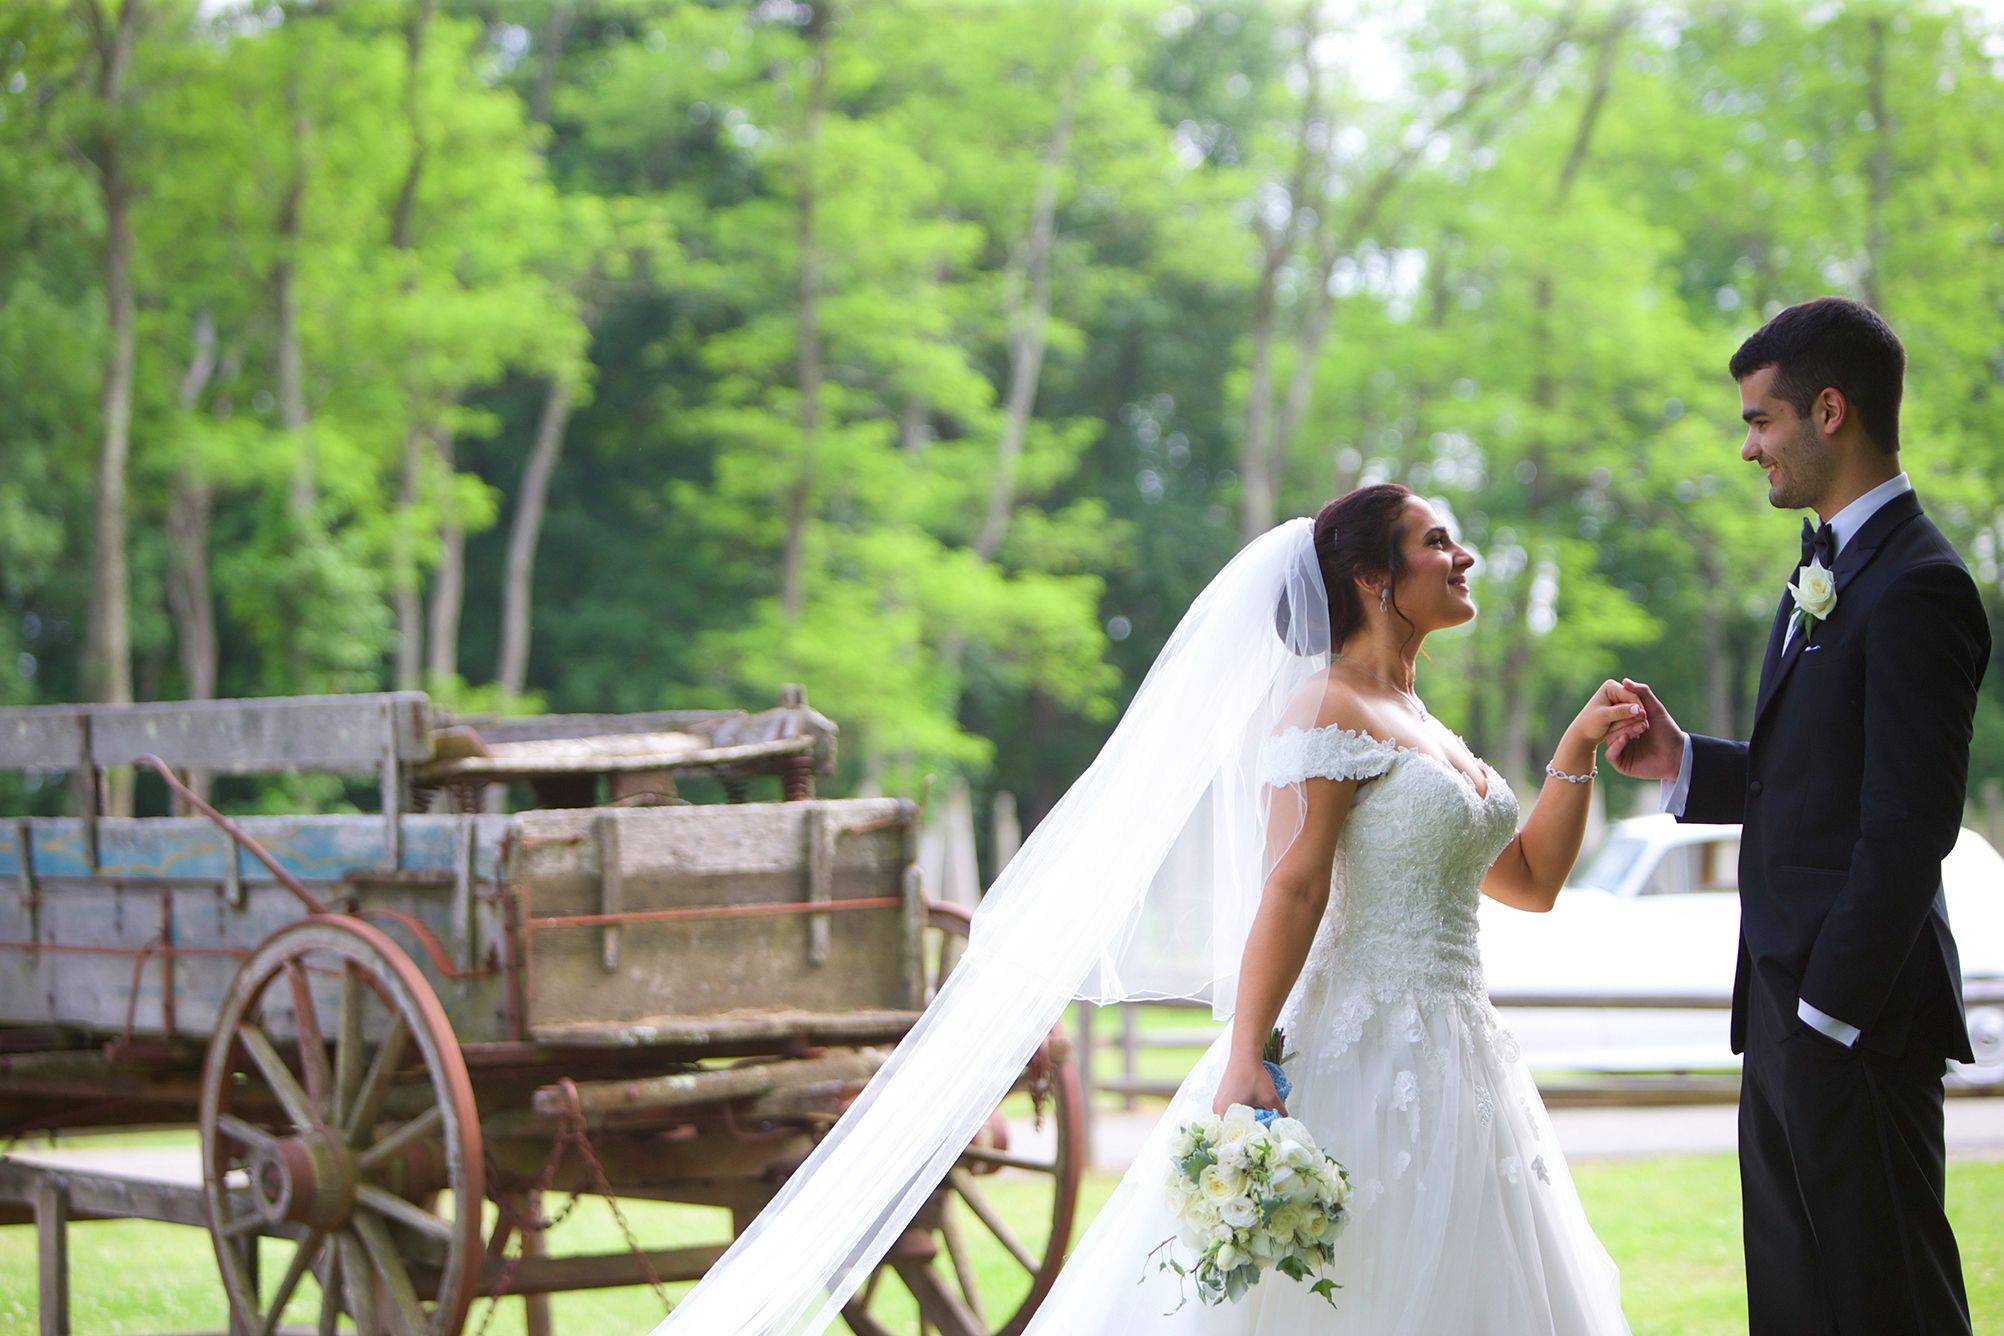 A bride and groom standing in front of a wagon.